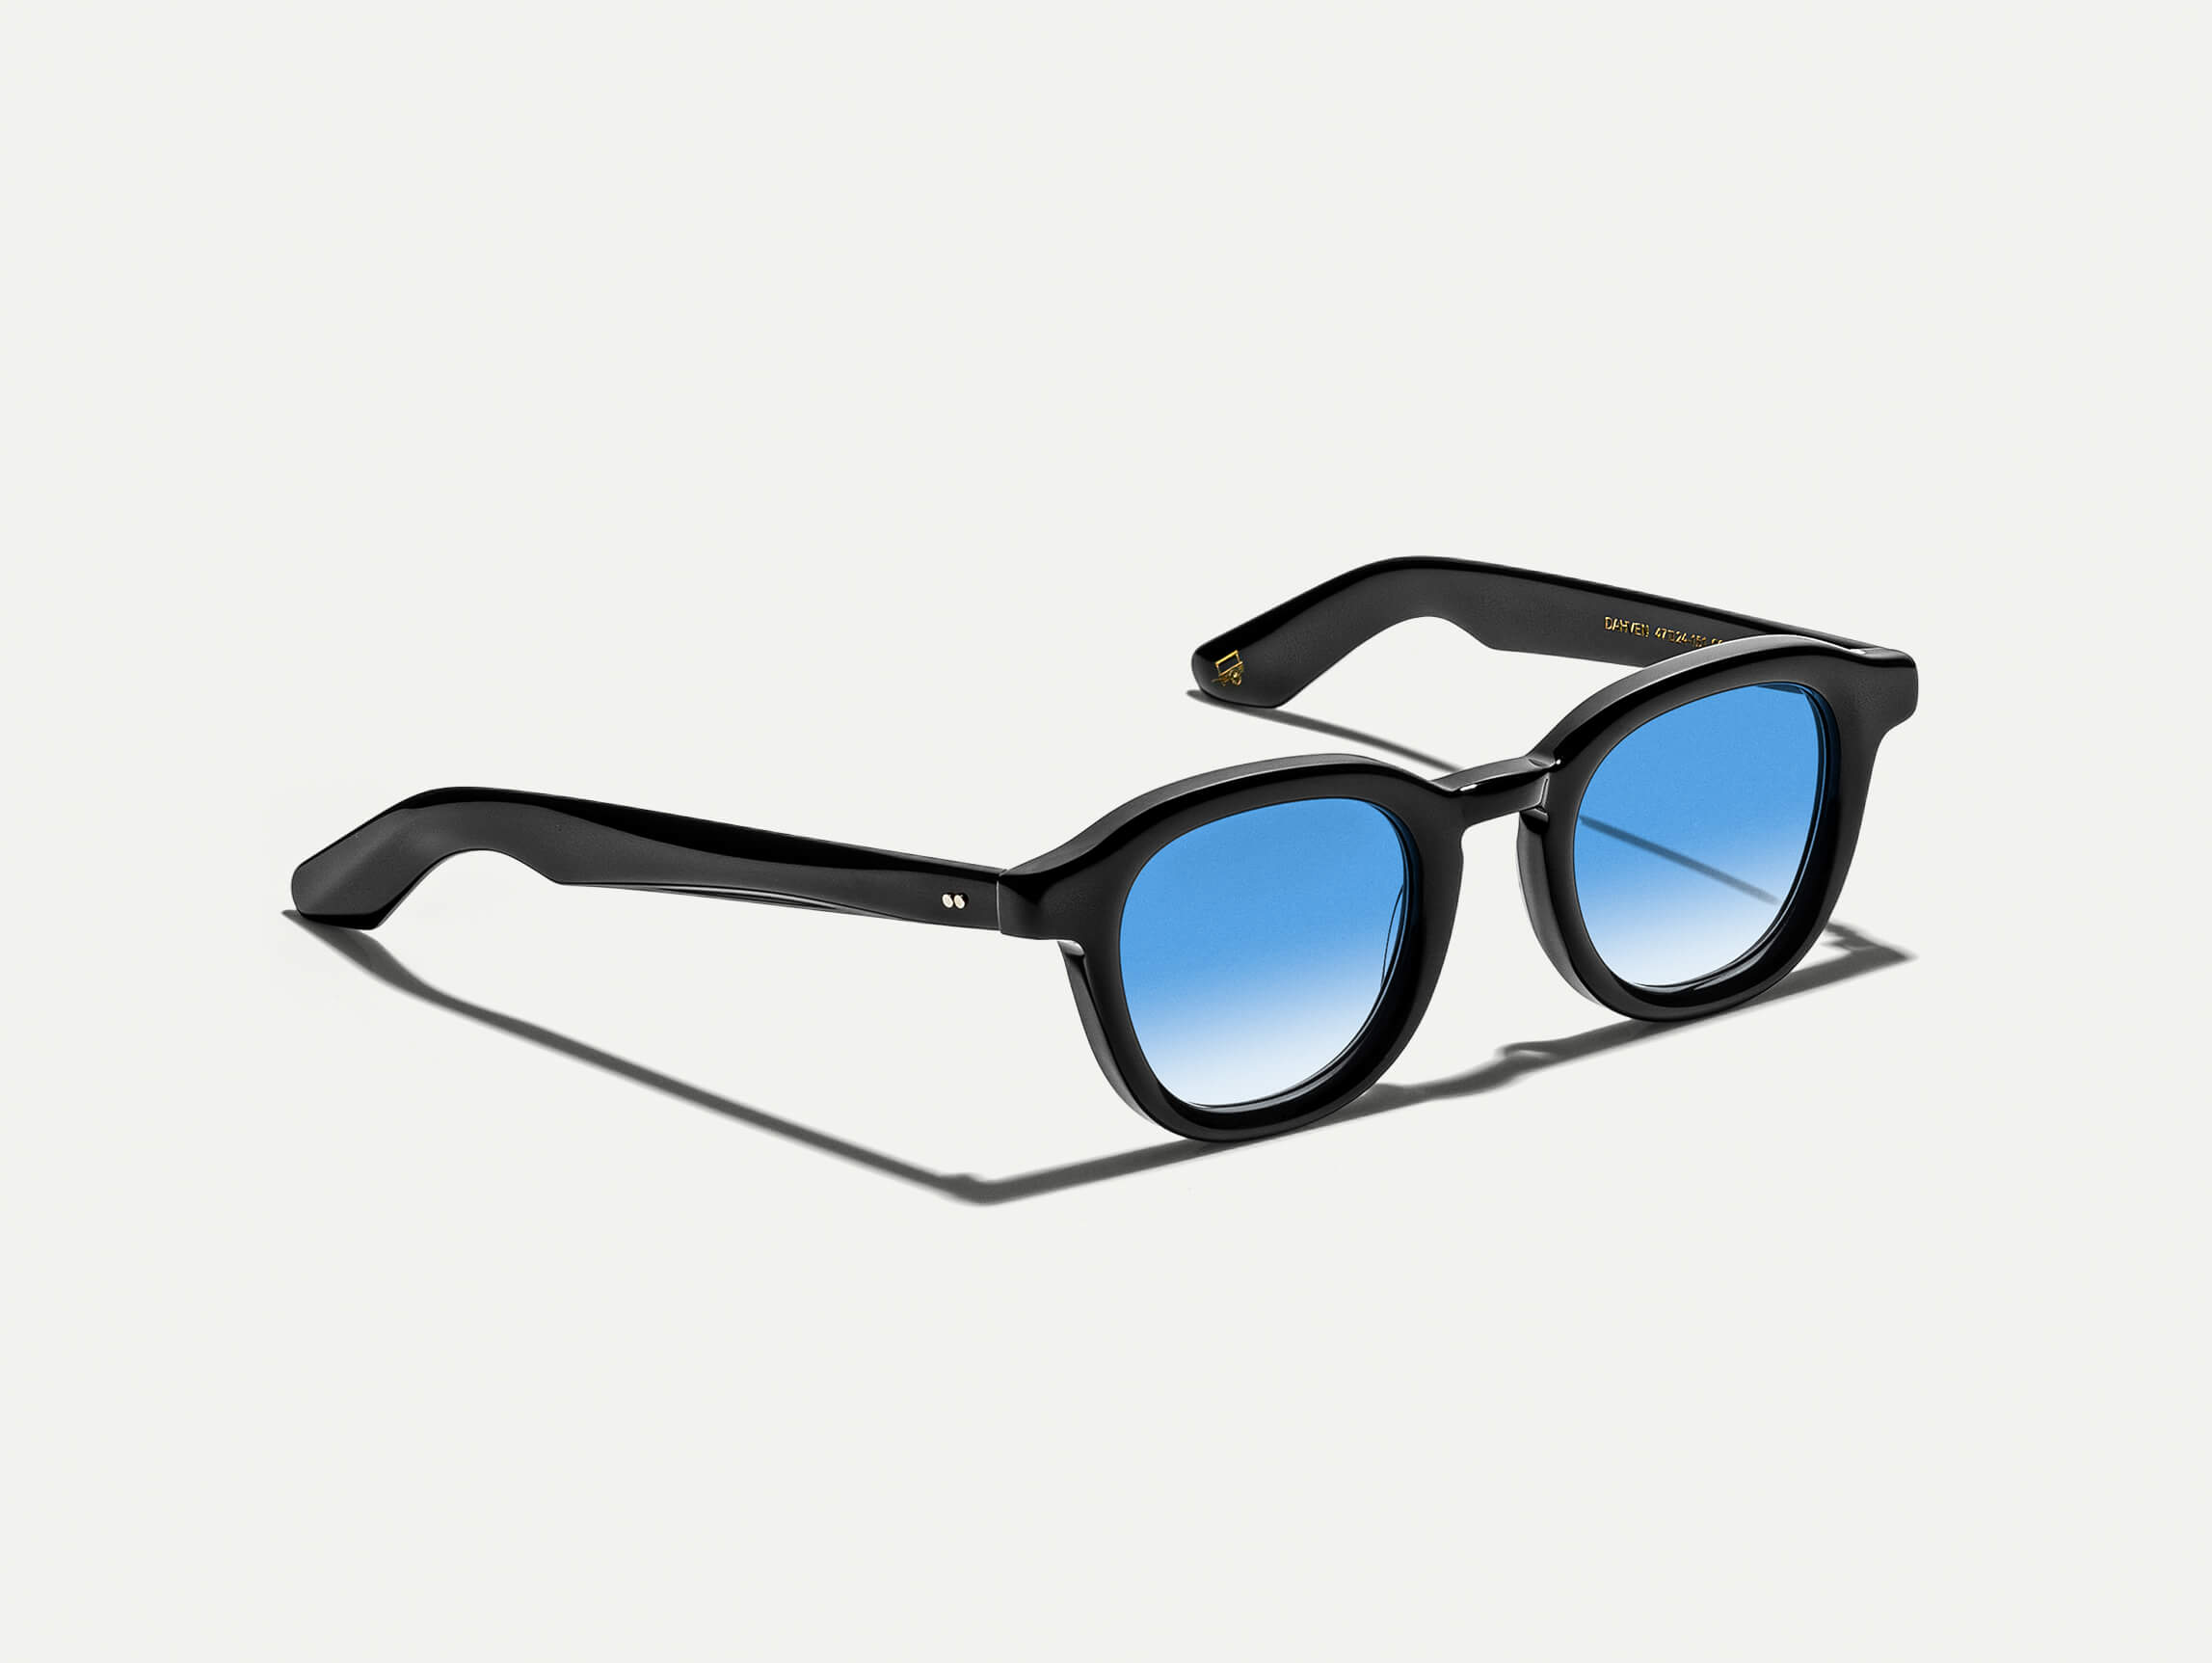 The DAHVEN Black with Broadway Blue Fade Tinted Lenses